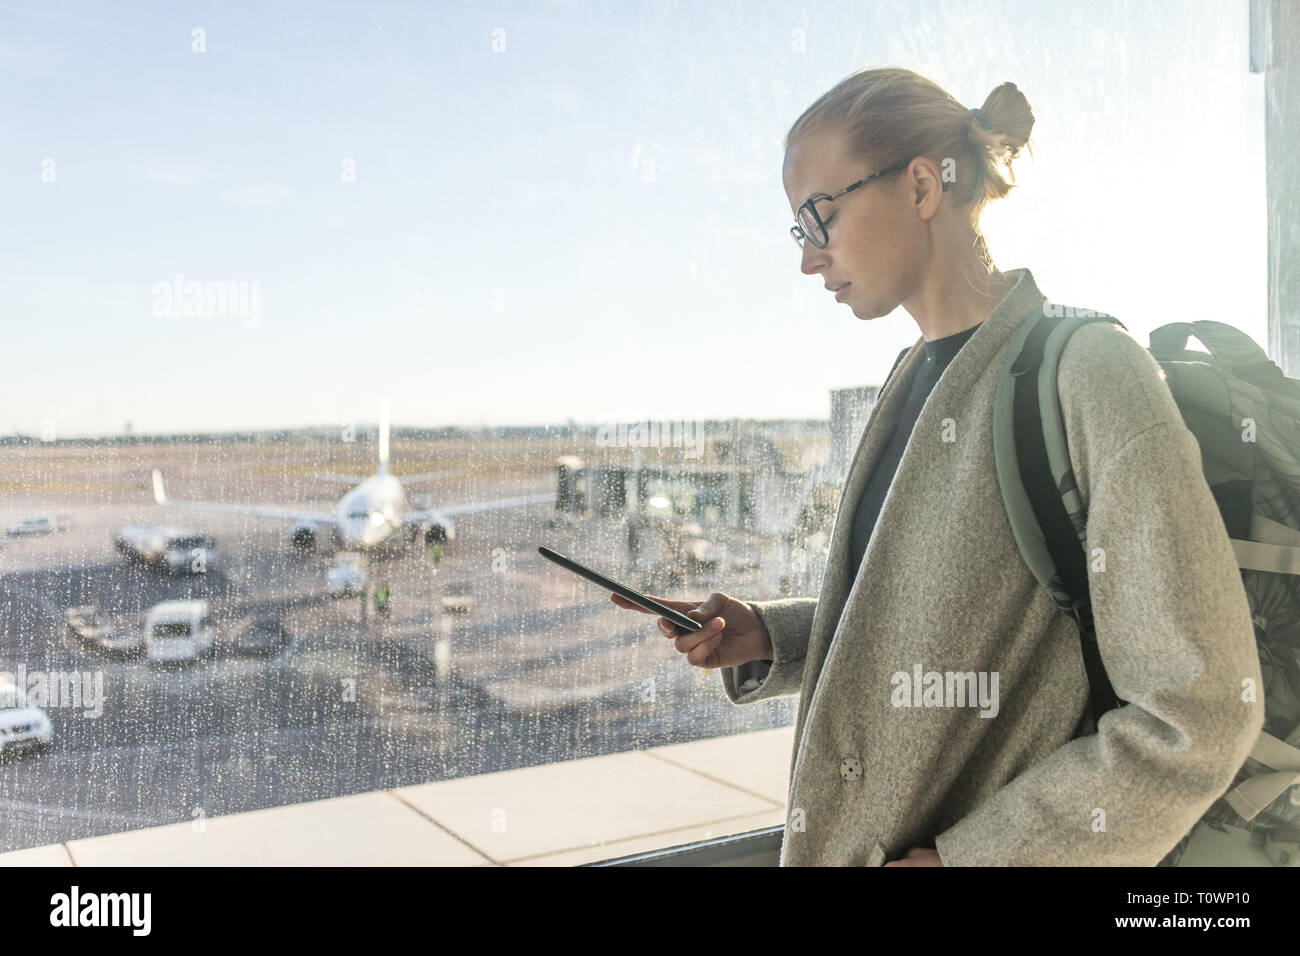 Casually dressed female traveler at airport looking at smart phone device in front of airport gate windows overlooking planes on airport runway Stock Photo